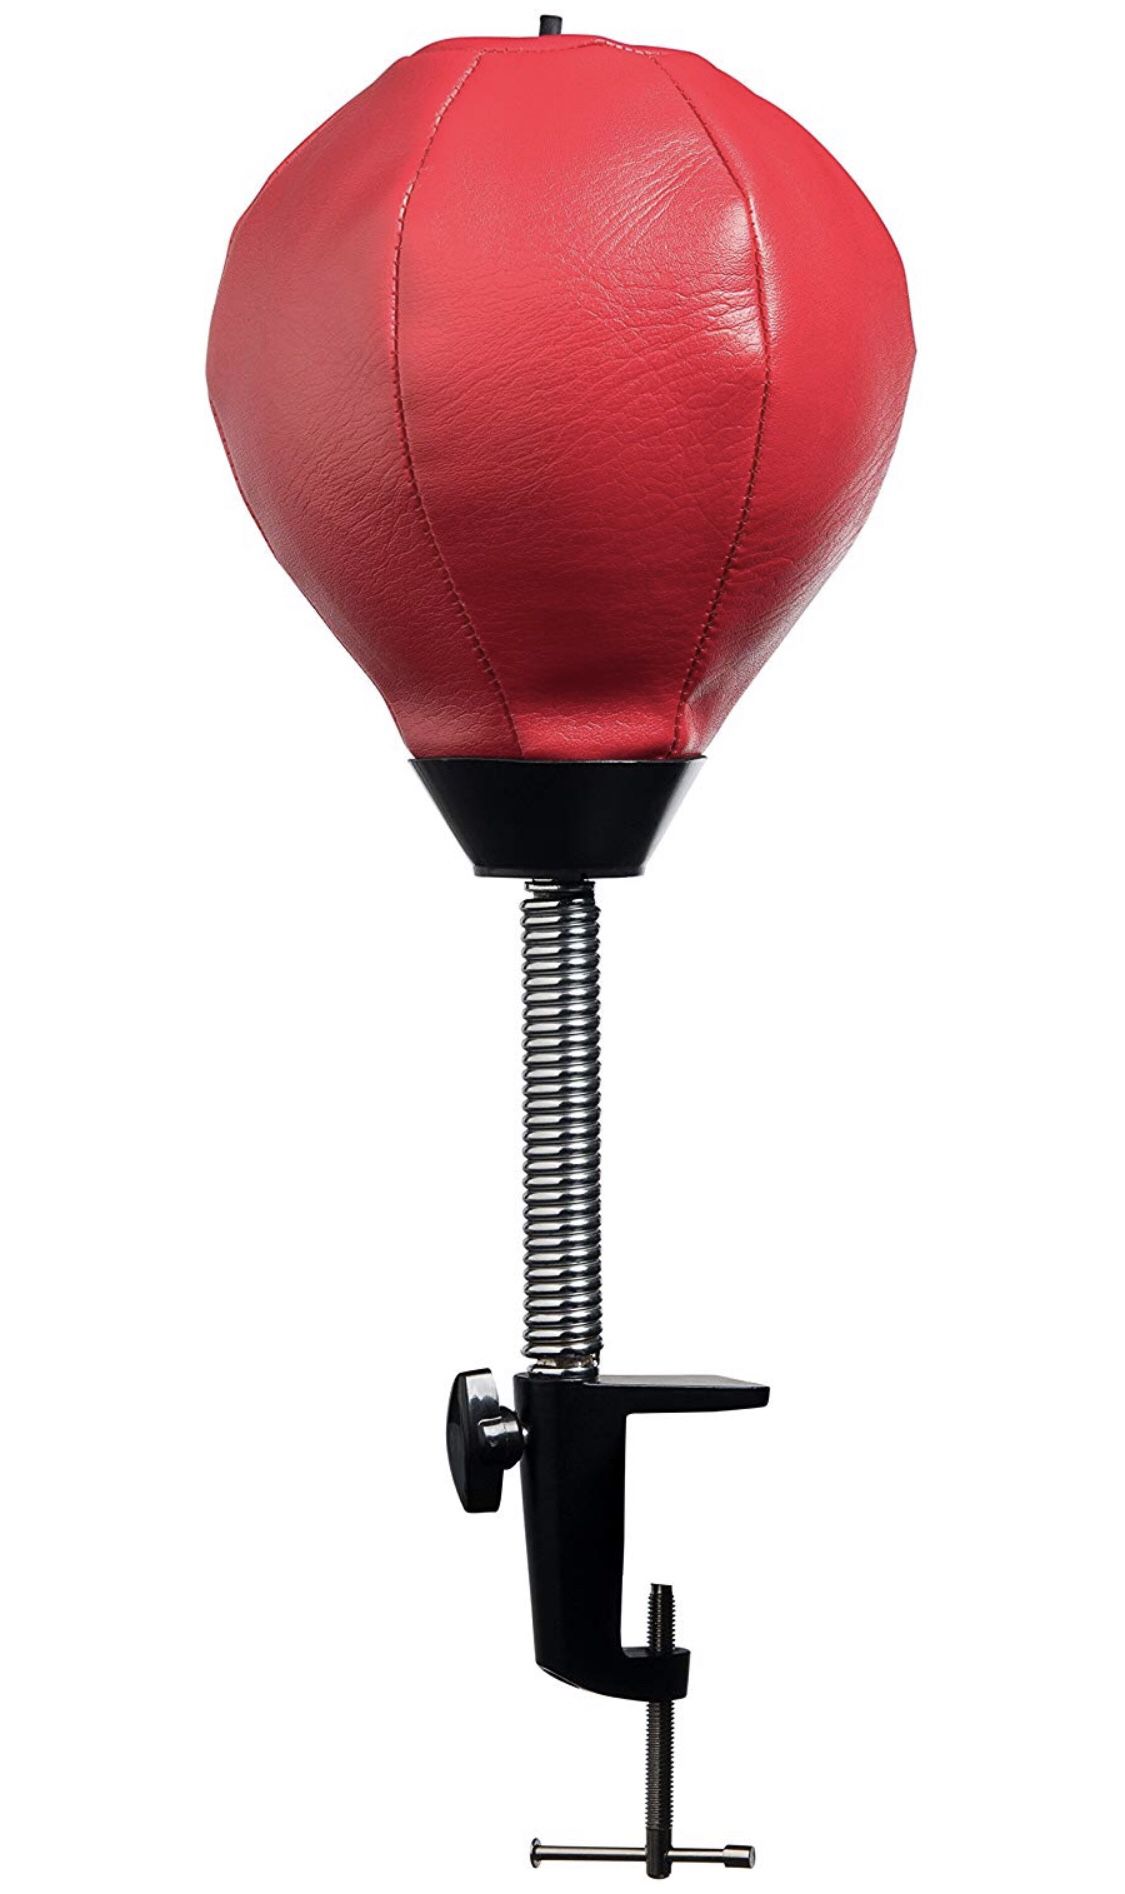 Stress Relief Toys - Desktop Punching Bag - with Desk Clamp and Suction Cup